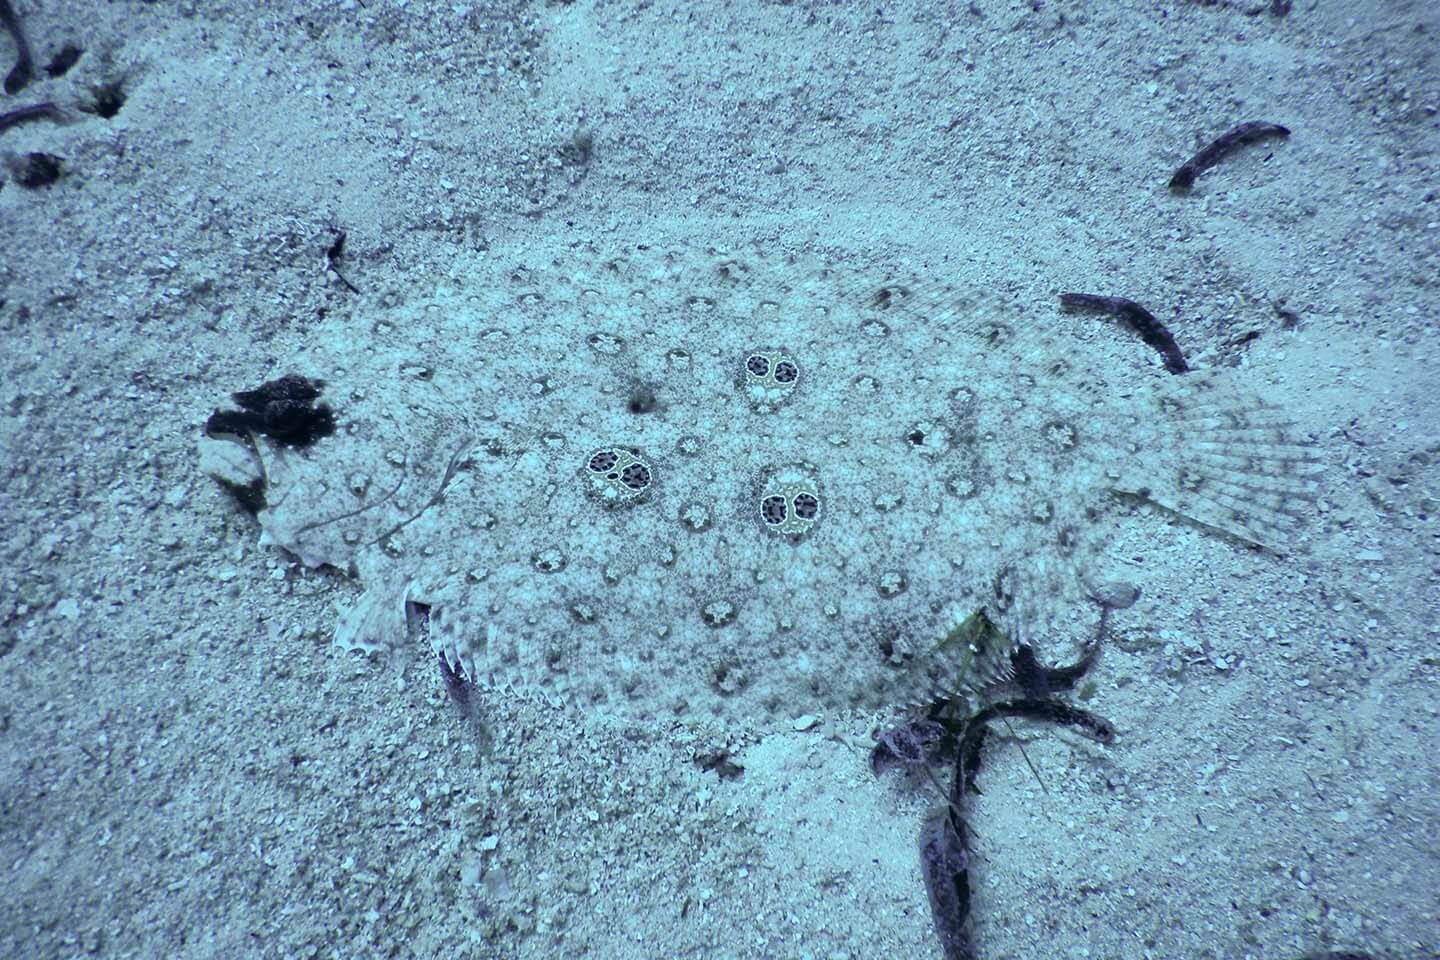 Ocellated Flounder ( Pseudorhombus dupliciocellatus ) camouflaged in the sand in Panglao, Bohol
﻿